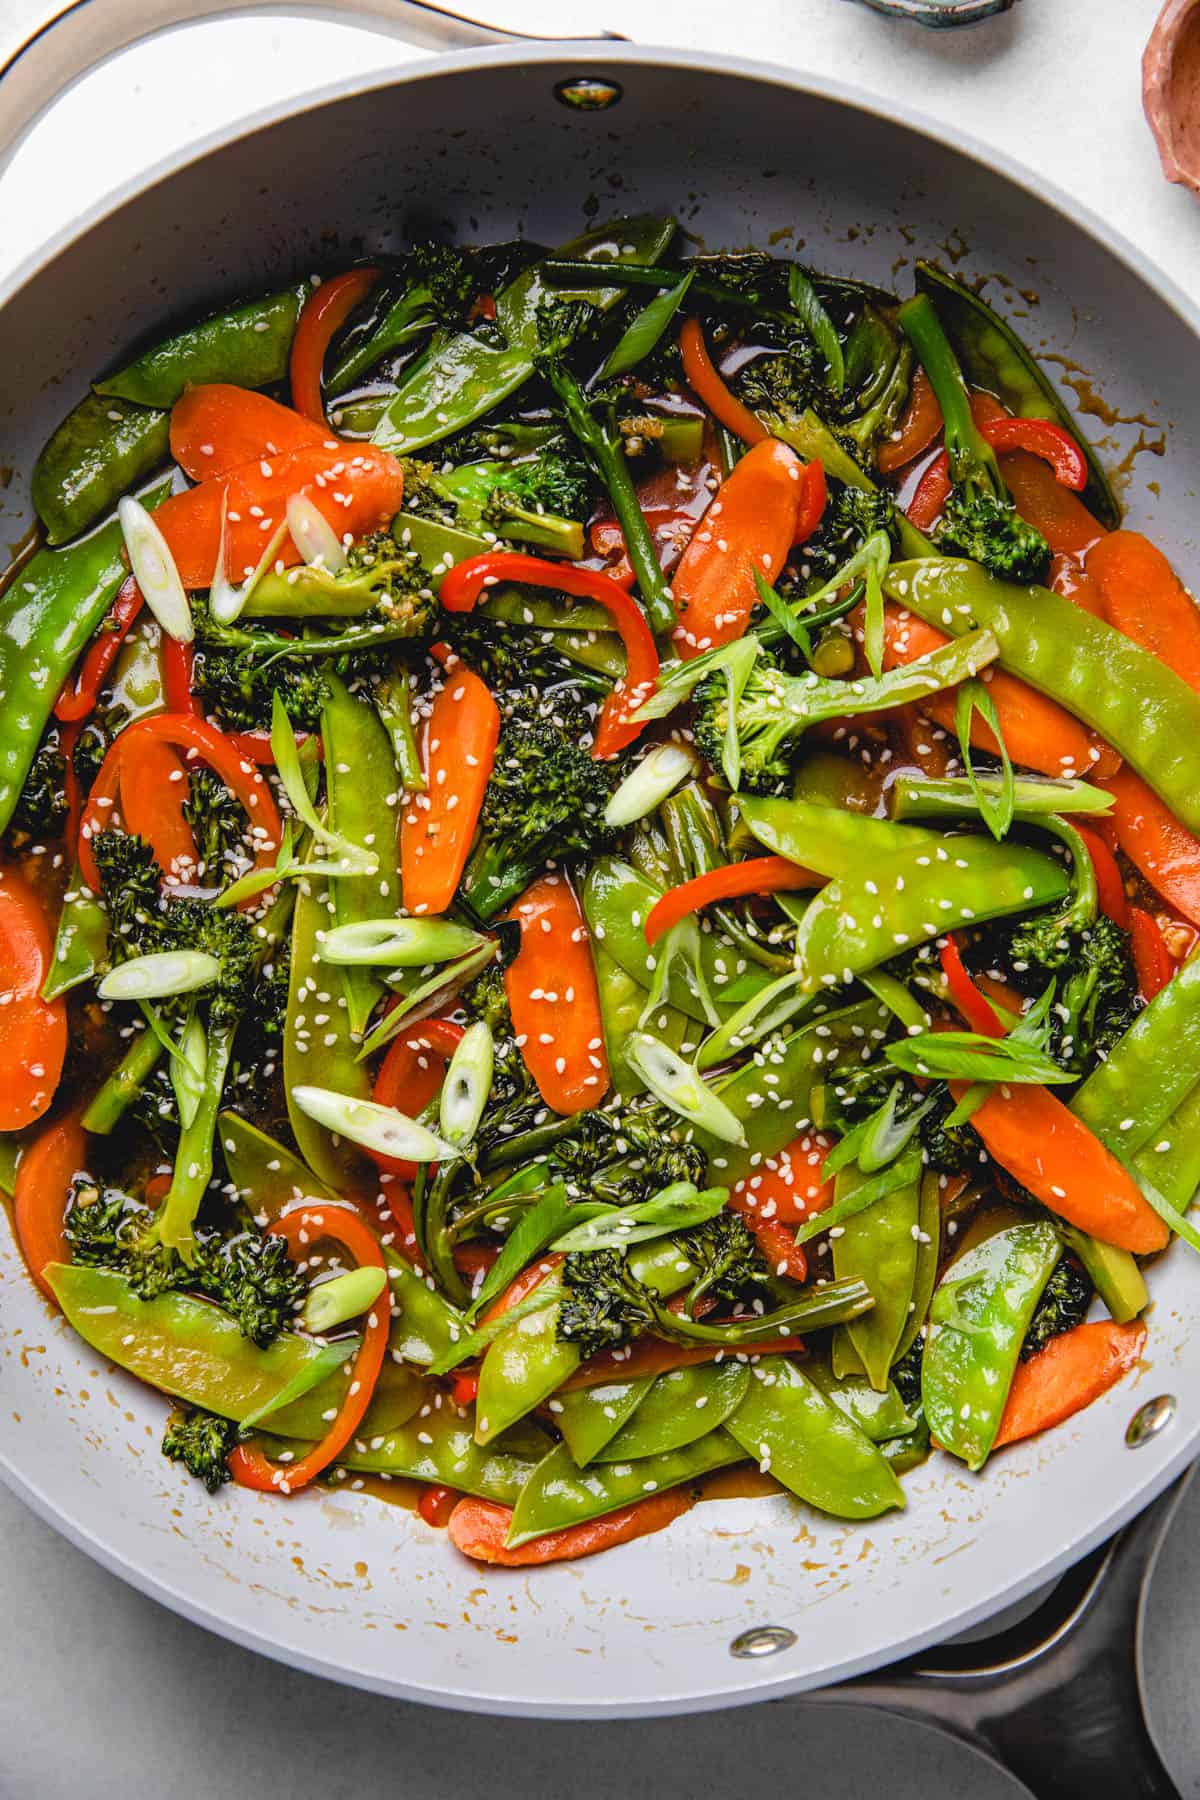 Sauteed broccoli, carrots, snow peas, and red bell pepper in teriyaki sauce in a skillet.